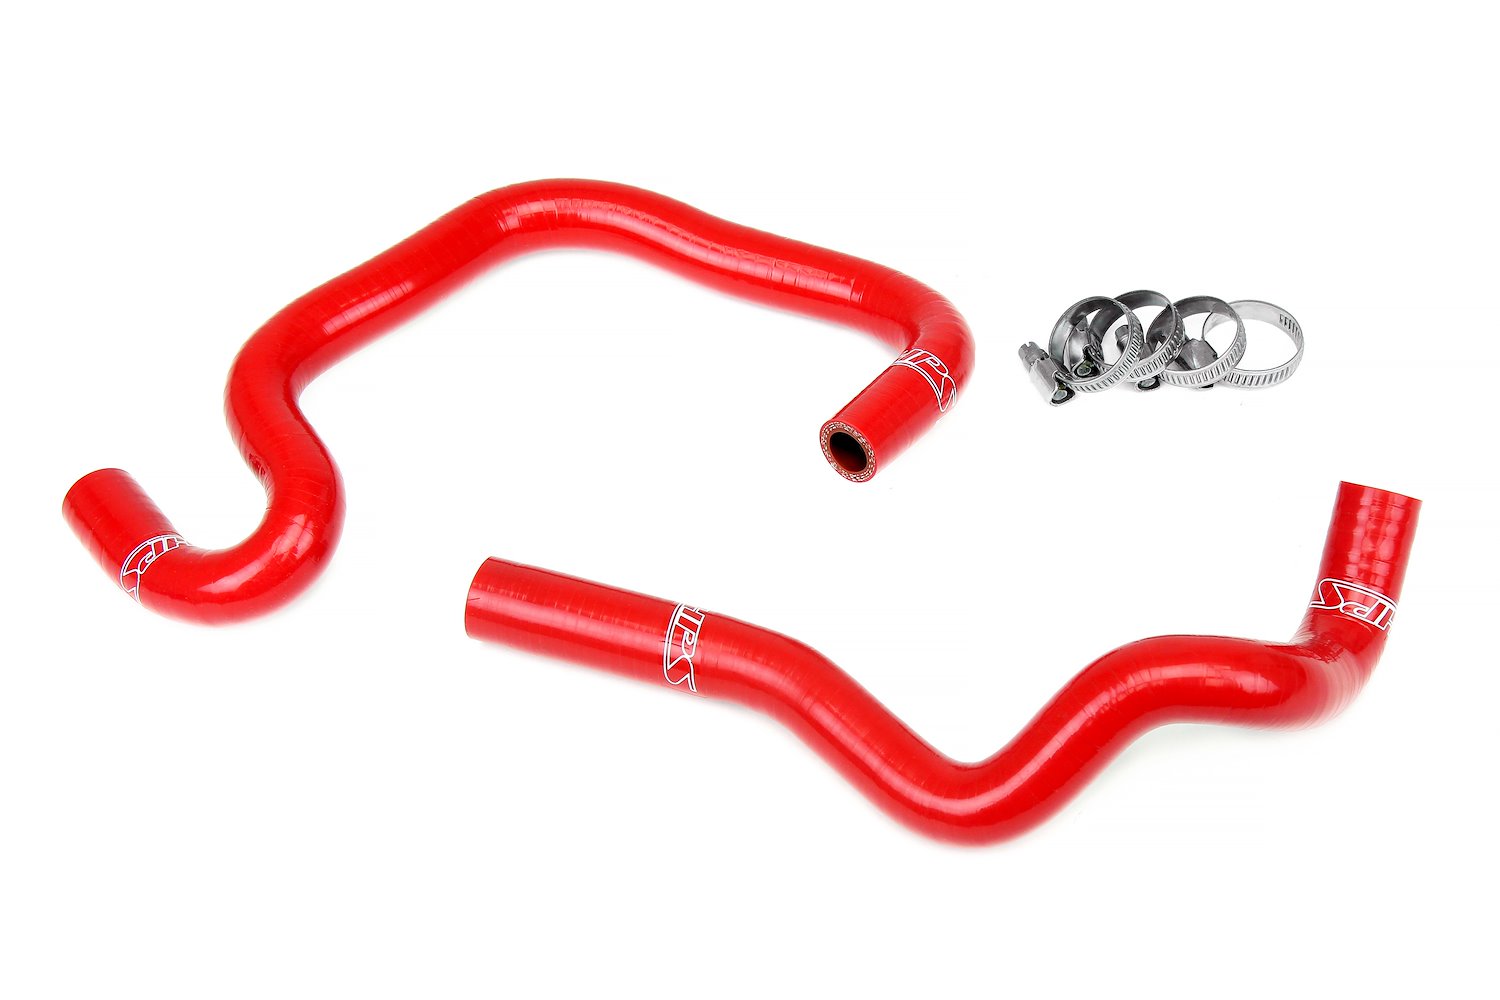 57-1082-RED Heater Hose Kit, 3-Ply Reinforced Silicone, Replaces Rubber Heater Coolant Hoses